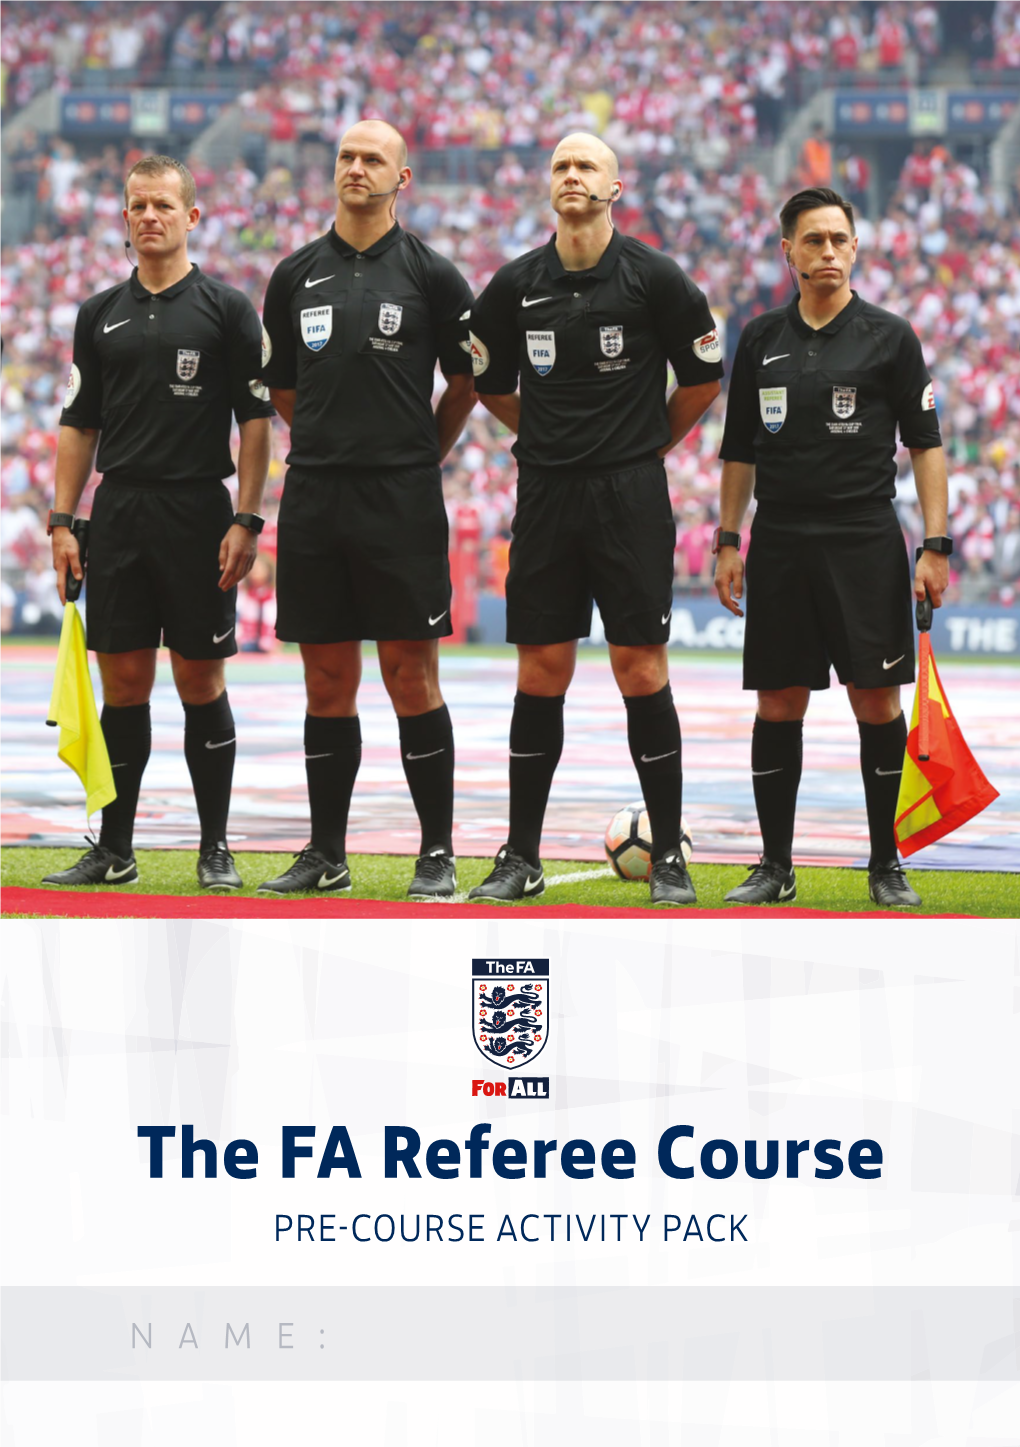 The FA Referee Course PRE-COURSE ACTIVITY PACK